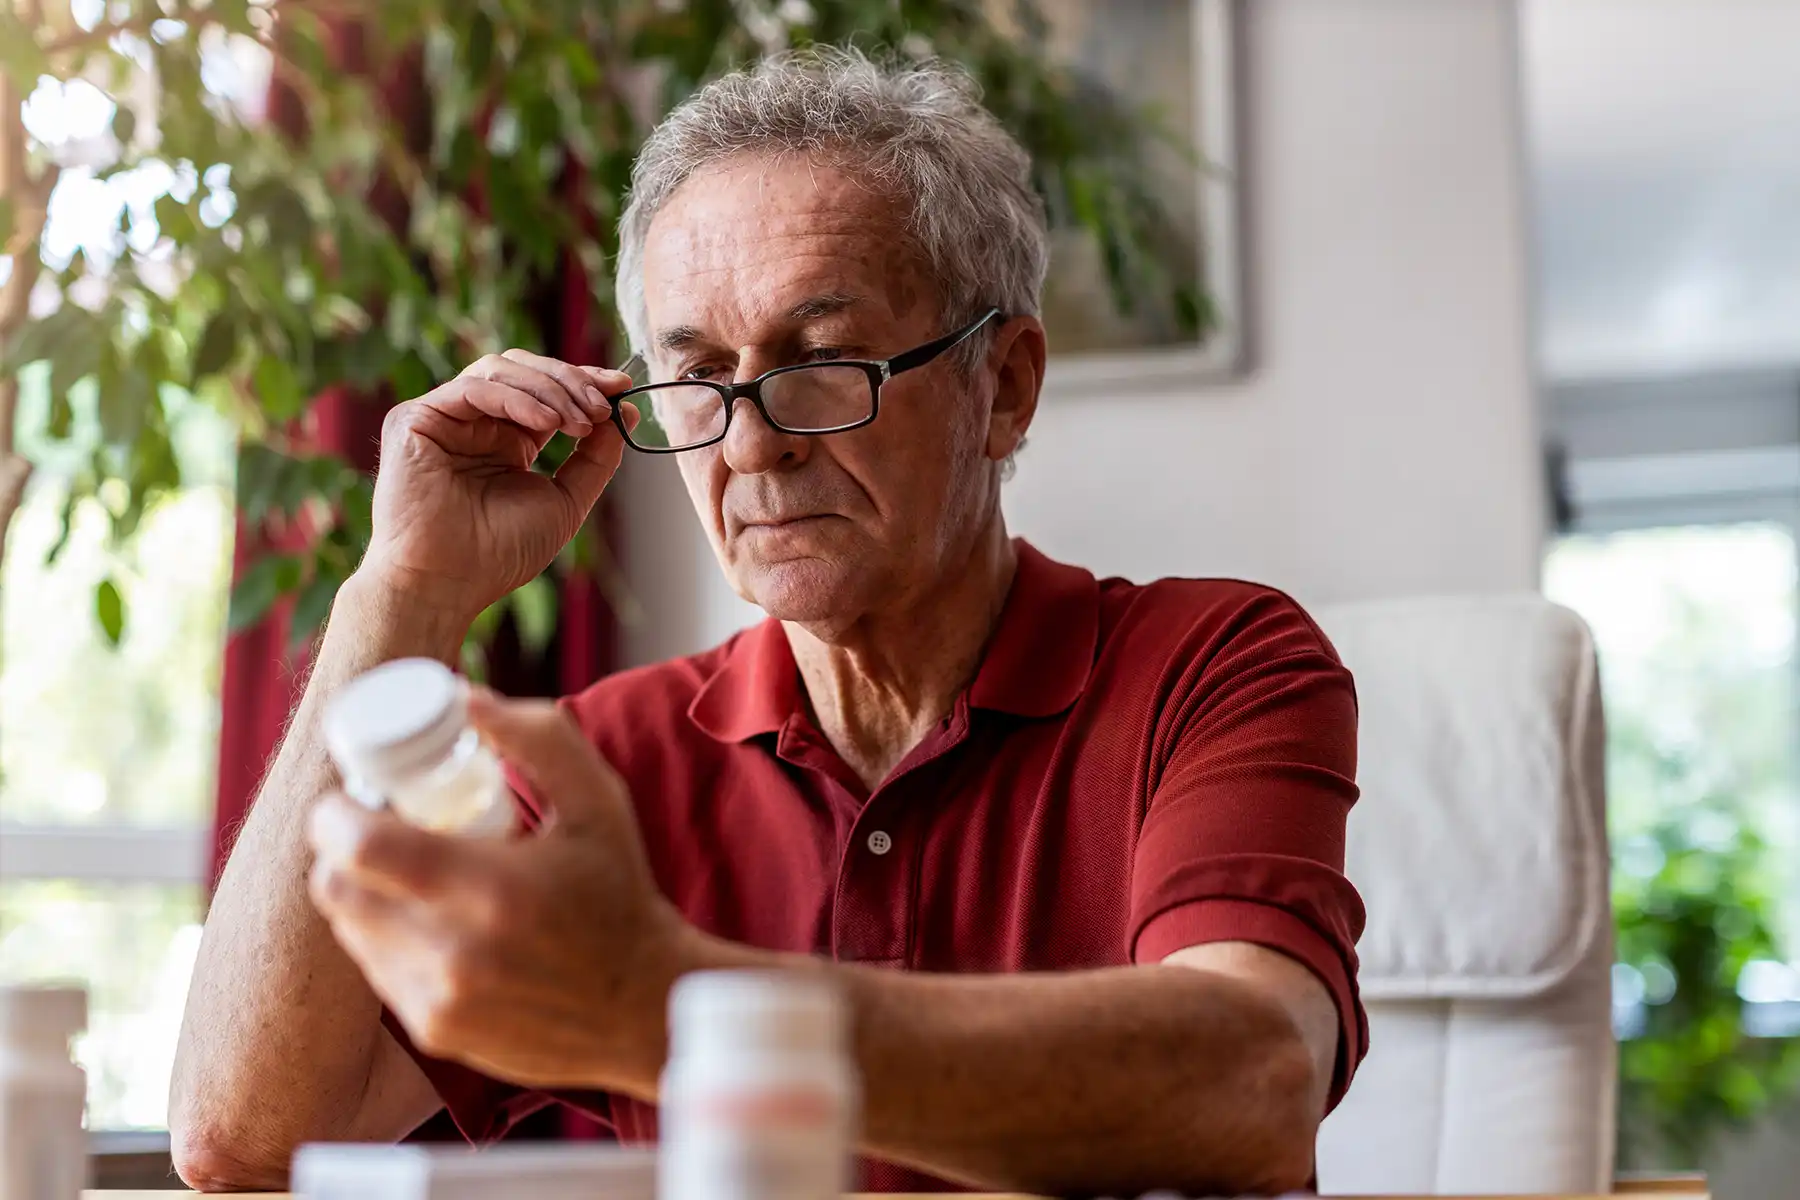 Older man putting on his glasses to read the label of his prescription pill bottle.